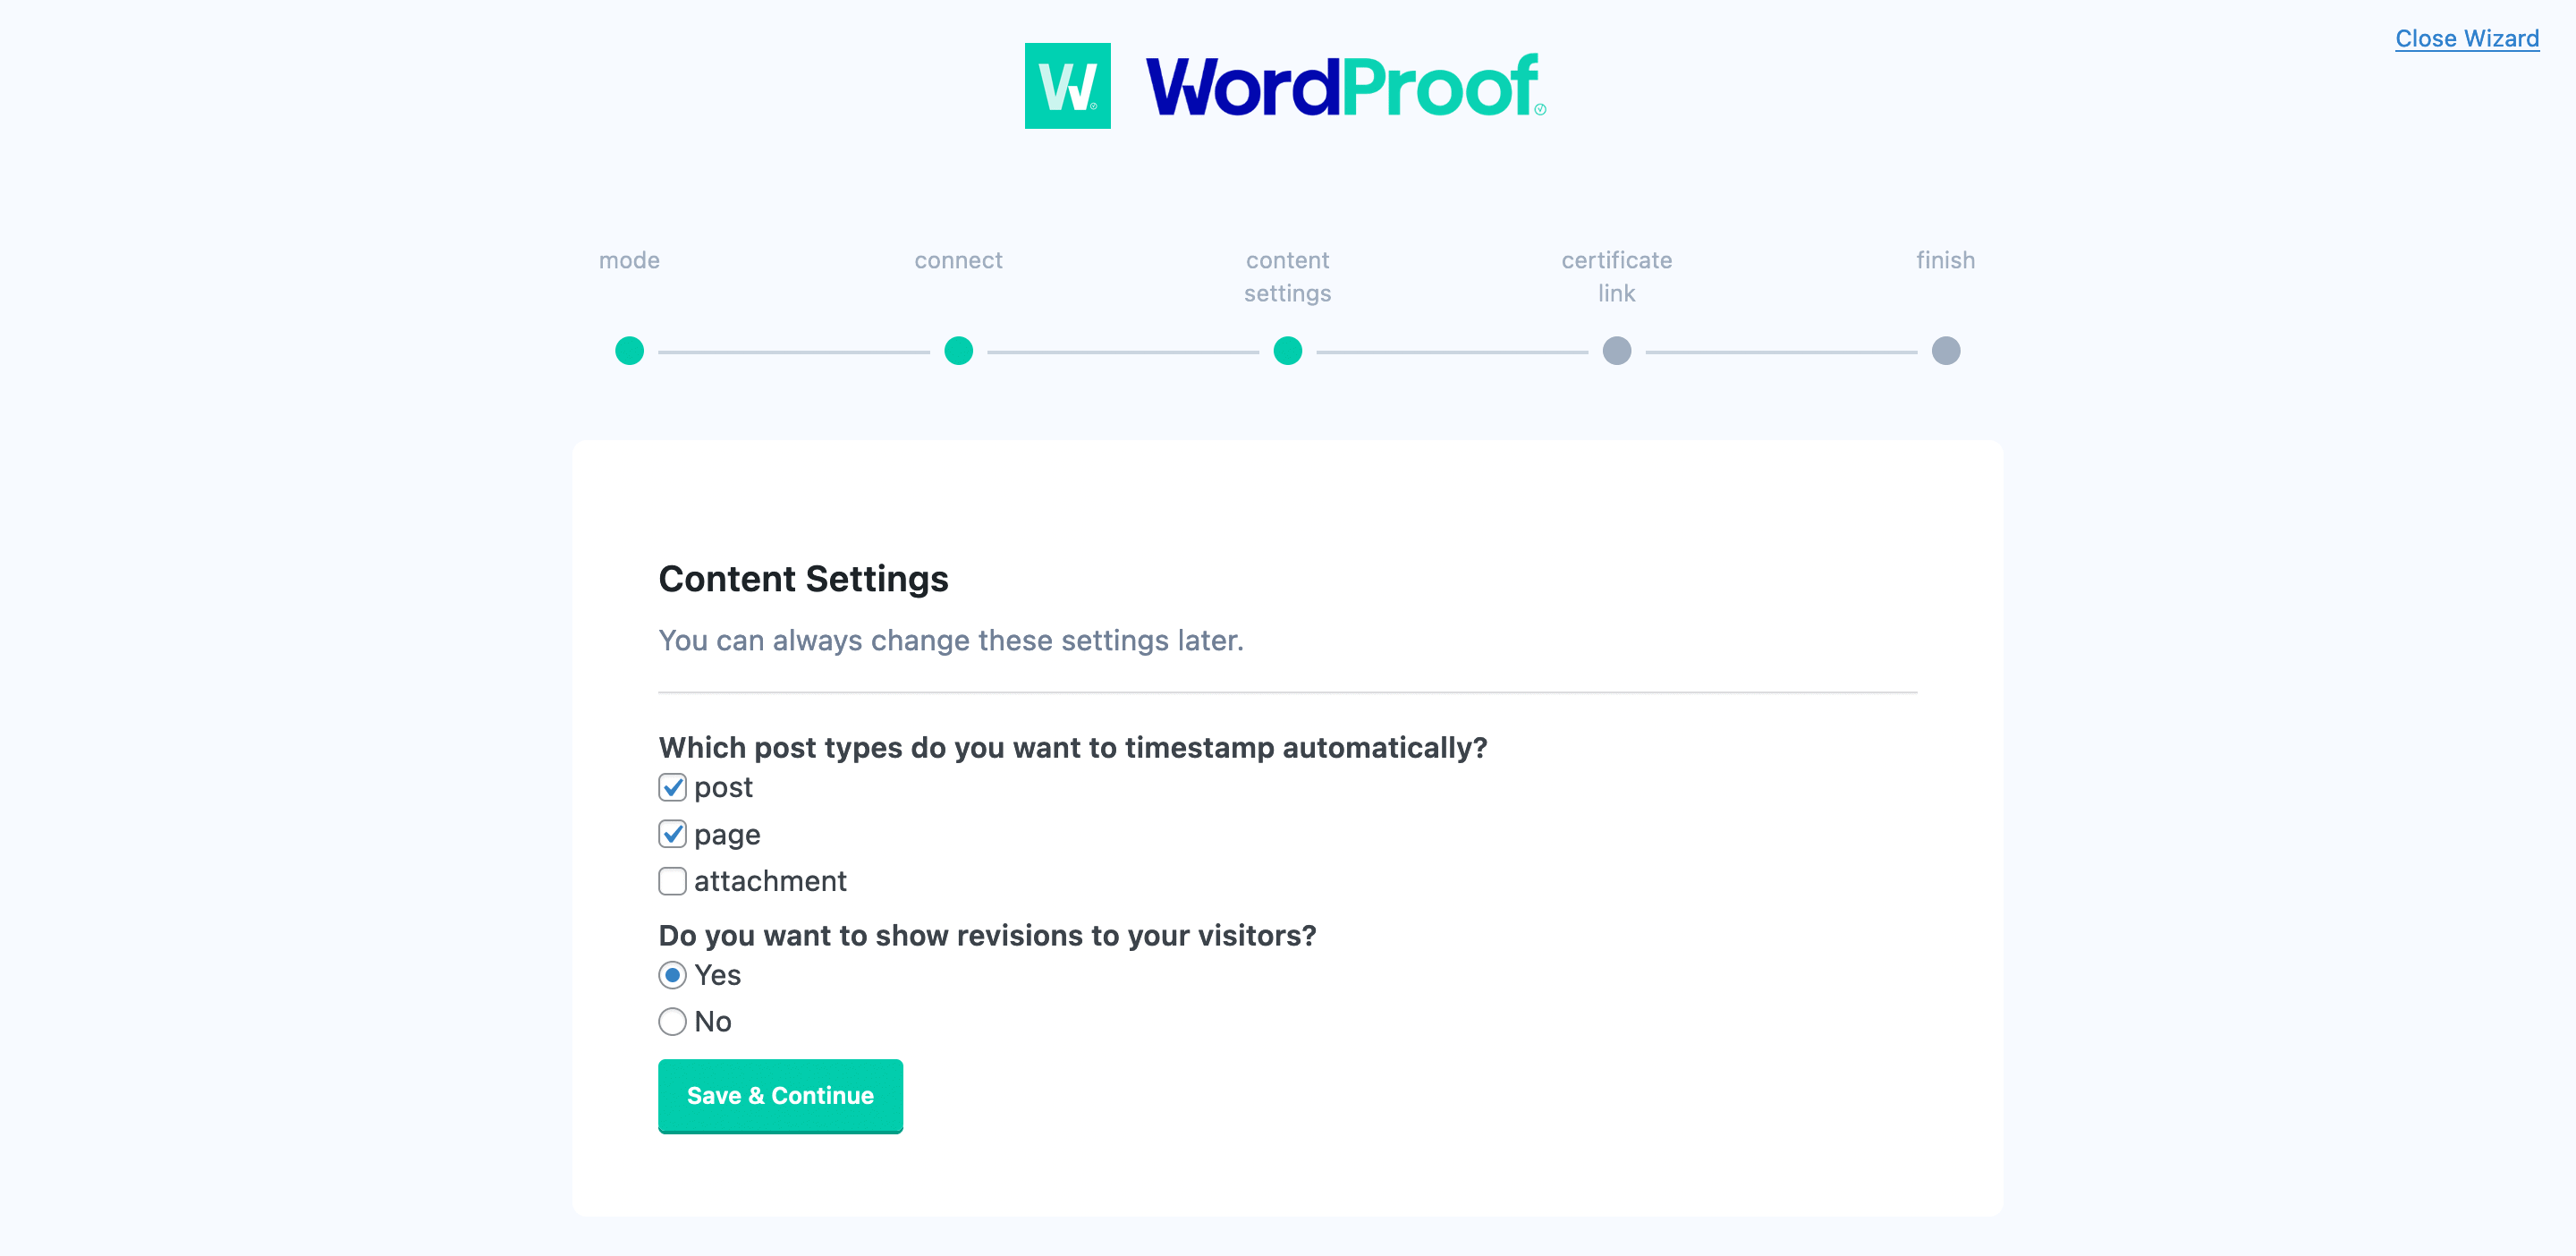 Running through the content settings within WordProof.